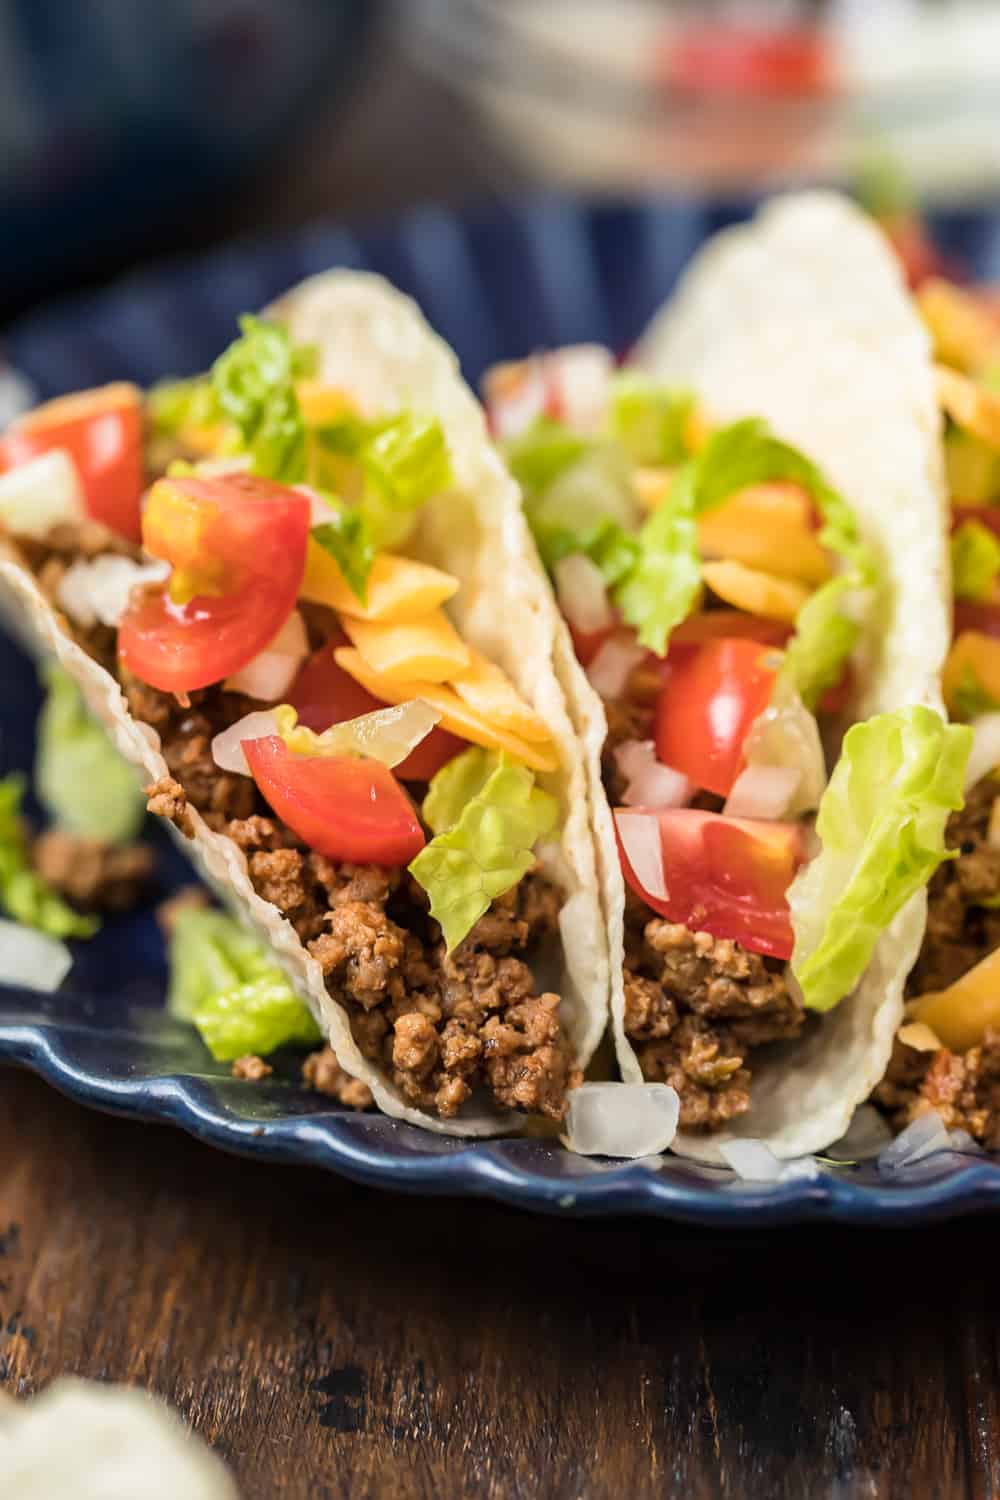 Slow Cooker Beef Tacos (Crockpot Taco Meat) - (HOW TO VIDEO)